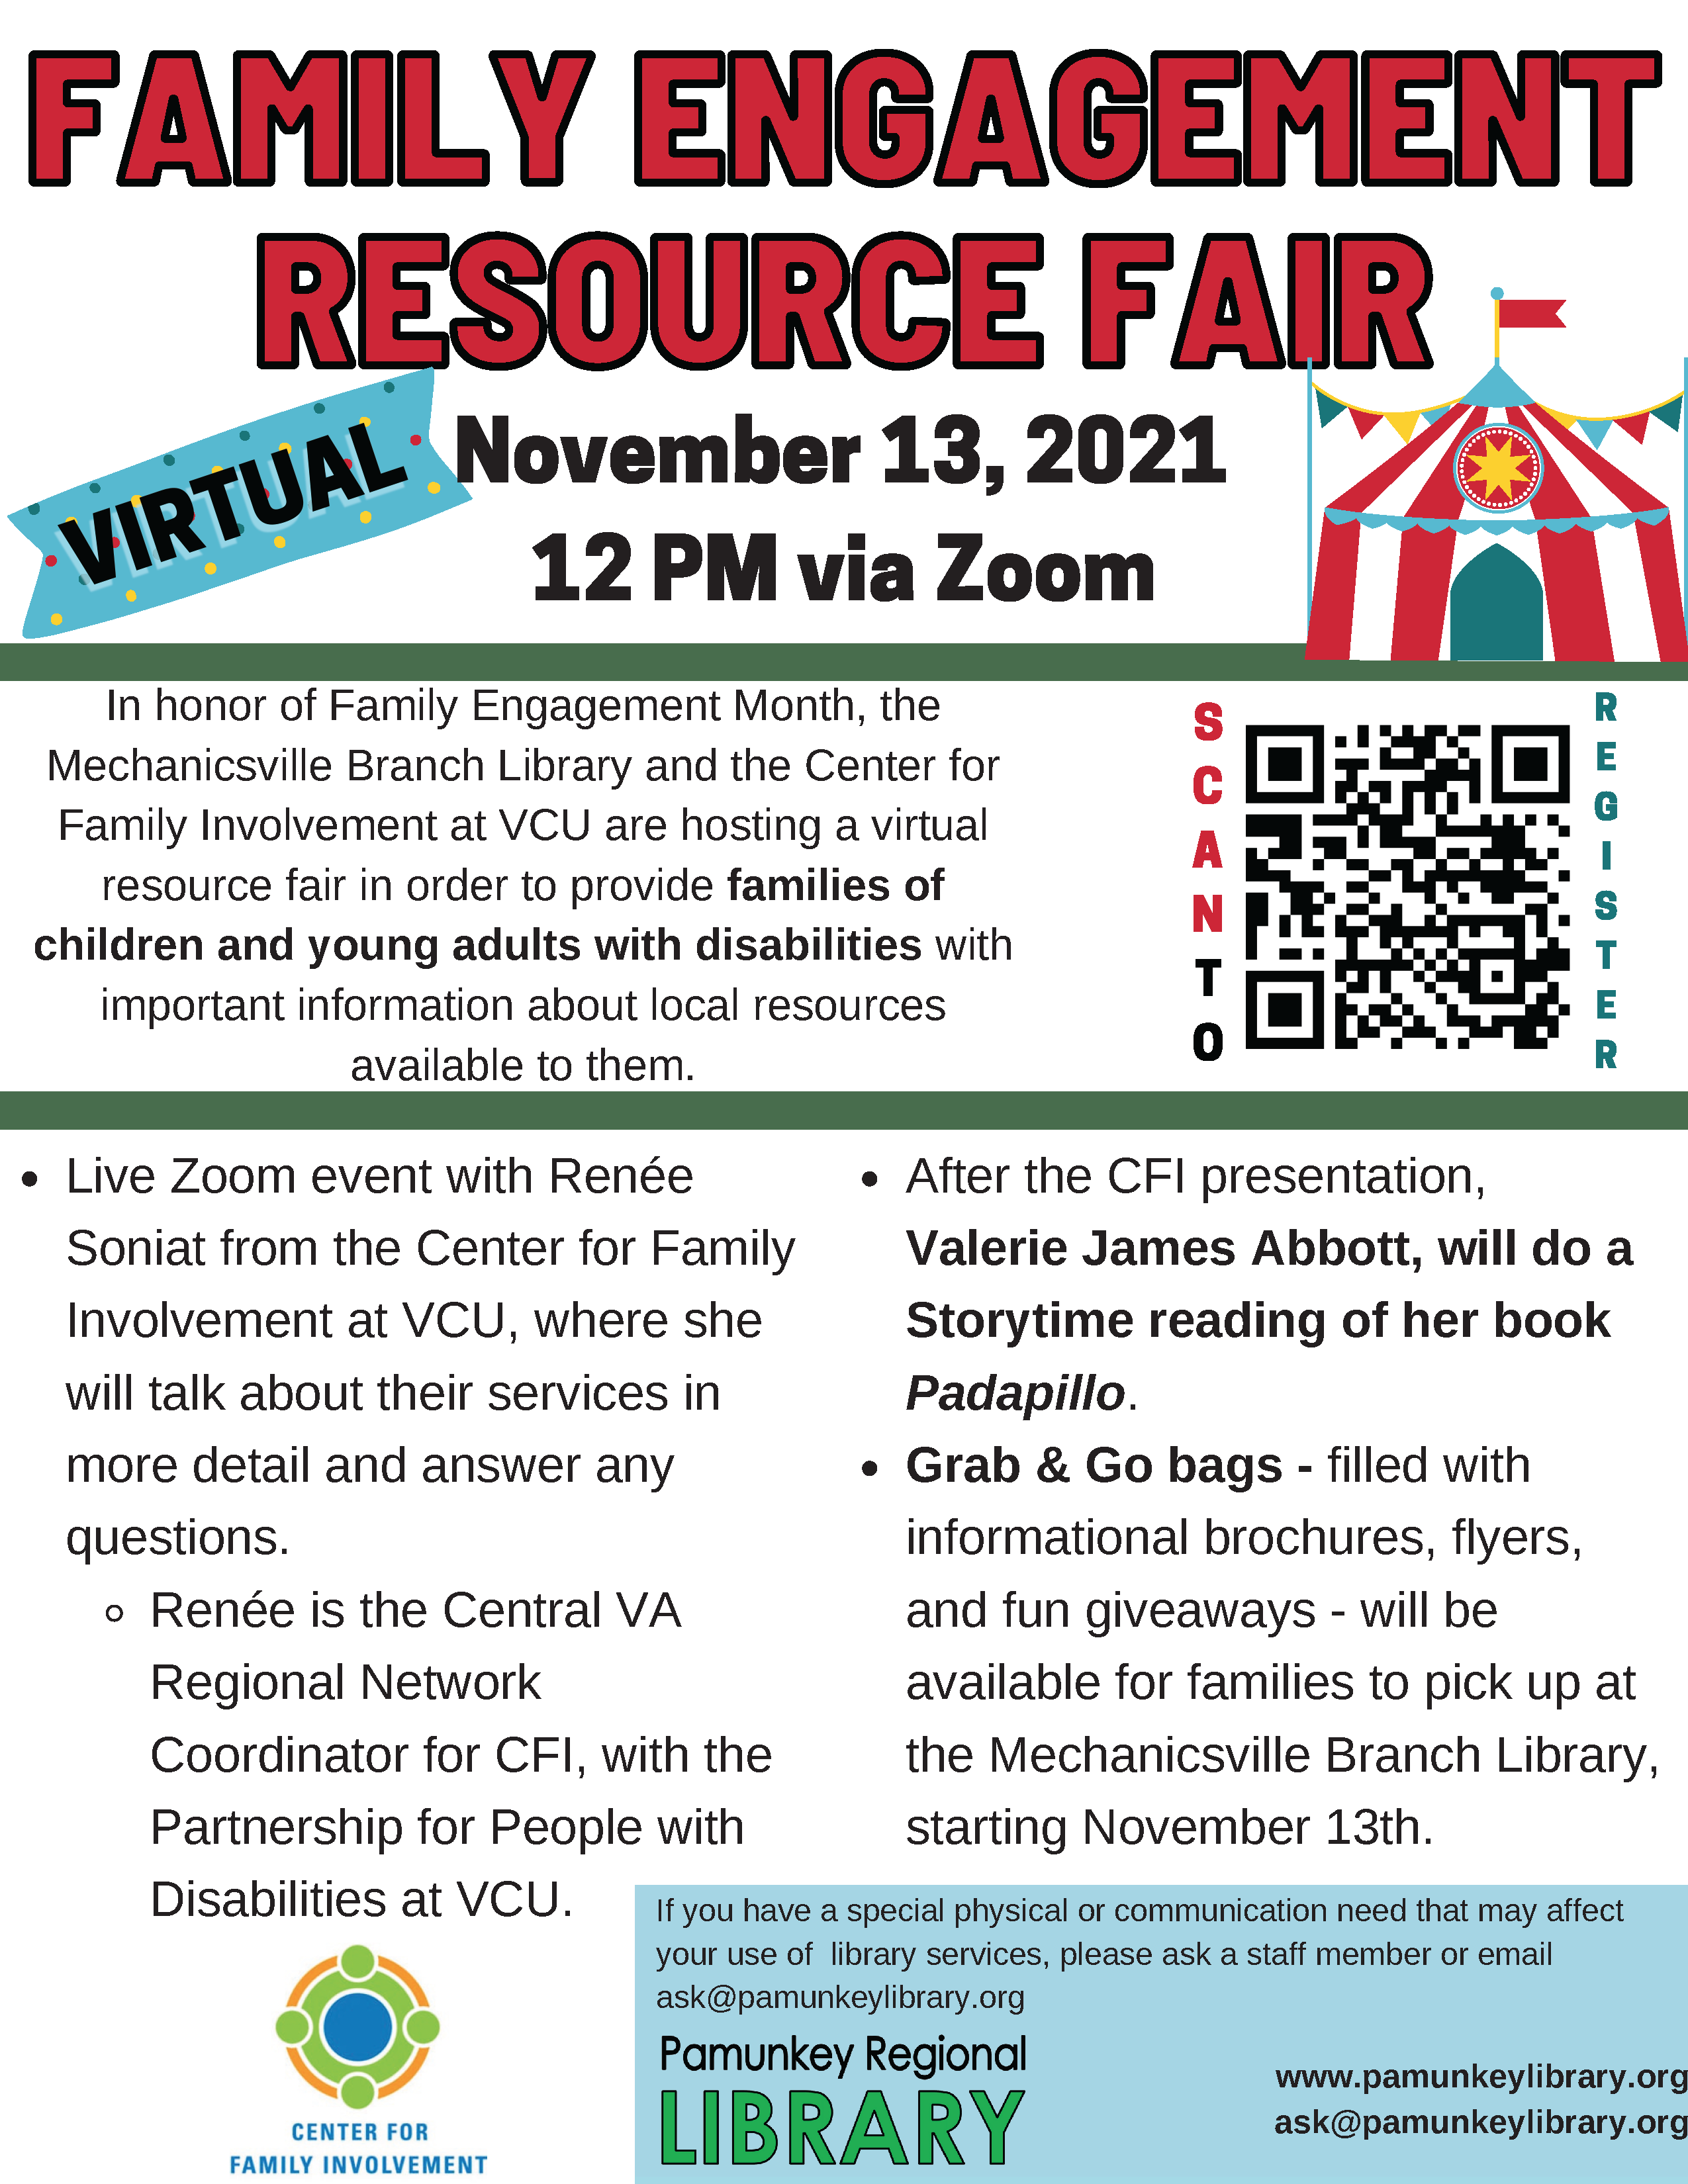 the image is a flyer for a resource fair